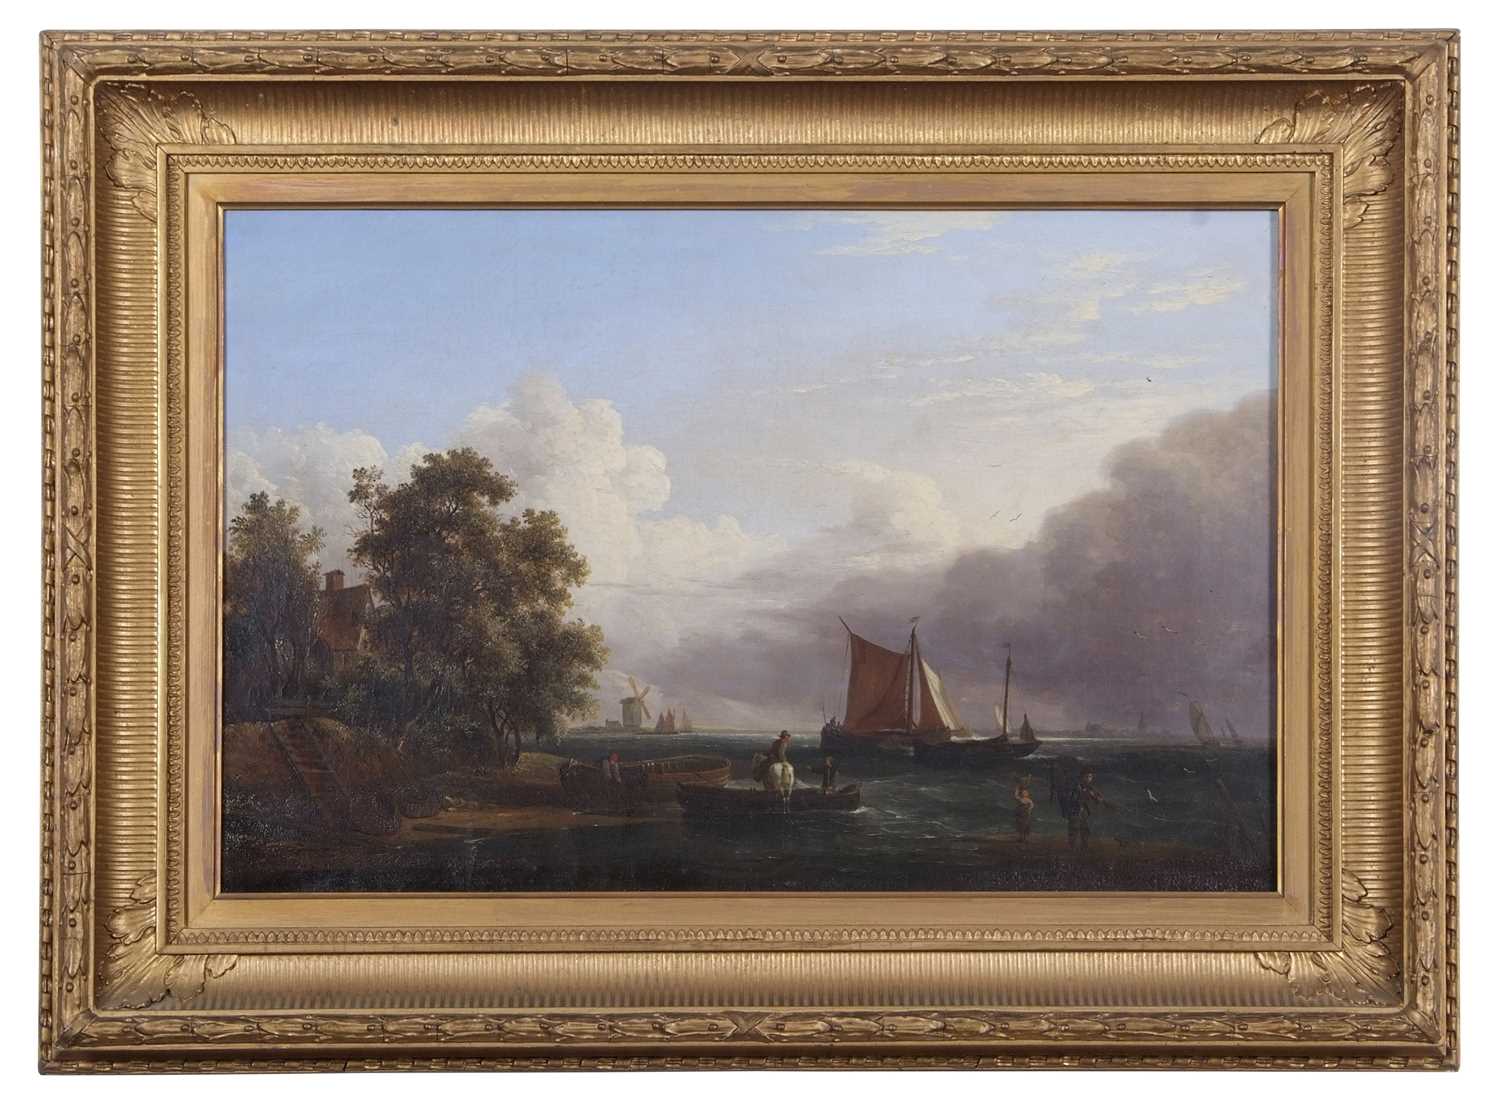 Attributed to George Vincent (British,1796-1831), Pair of oils on canvas depicting fisherfolk on the - Image 2 of 2